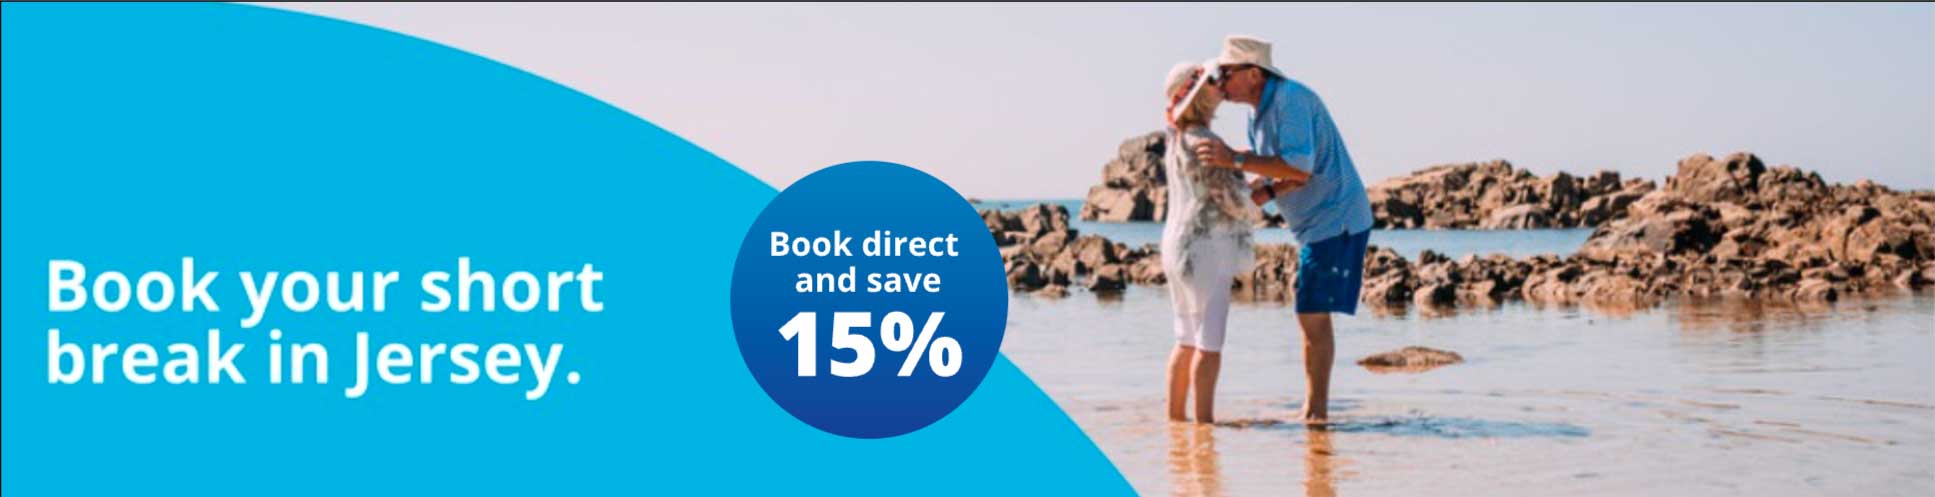 Book direct and save 15%